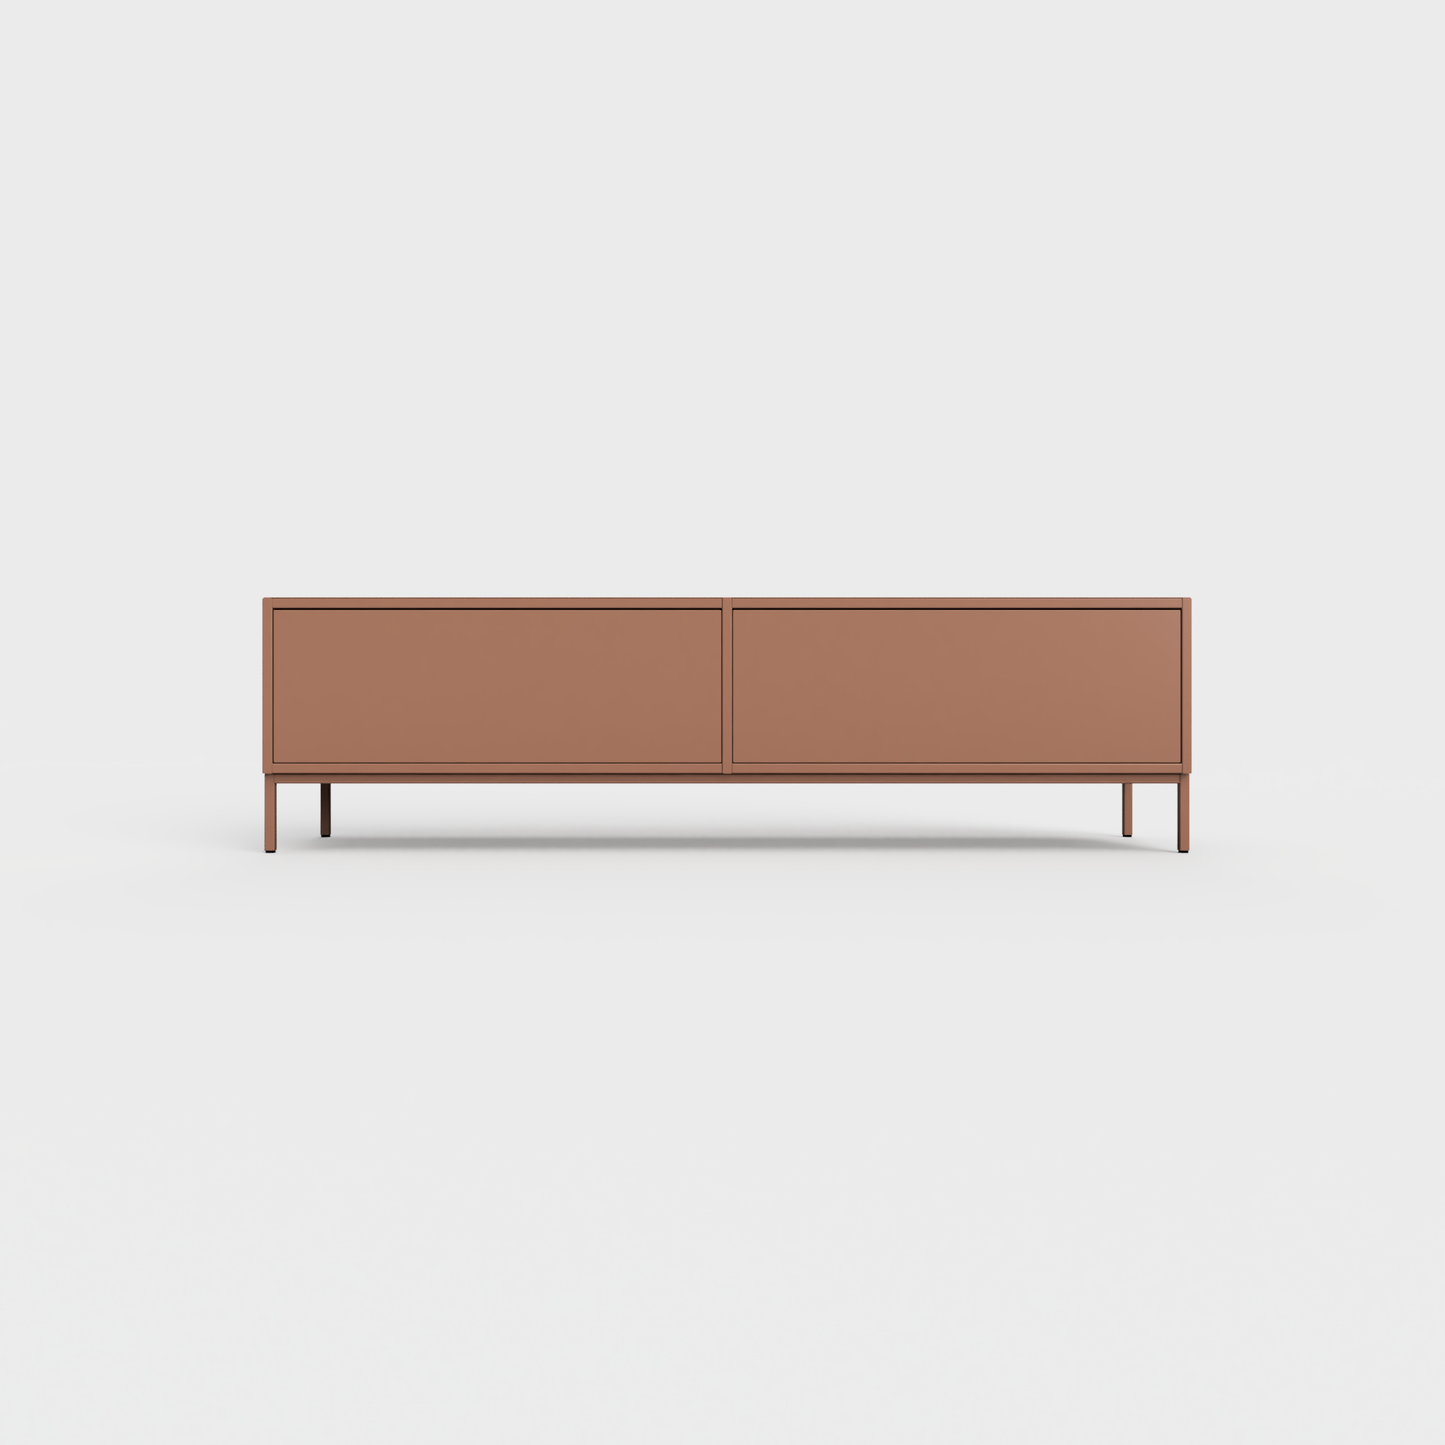 Prunus 01 Lowboard in Terracotta color, powder-coated steel, elegant and modern piece of furniture for your living room